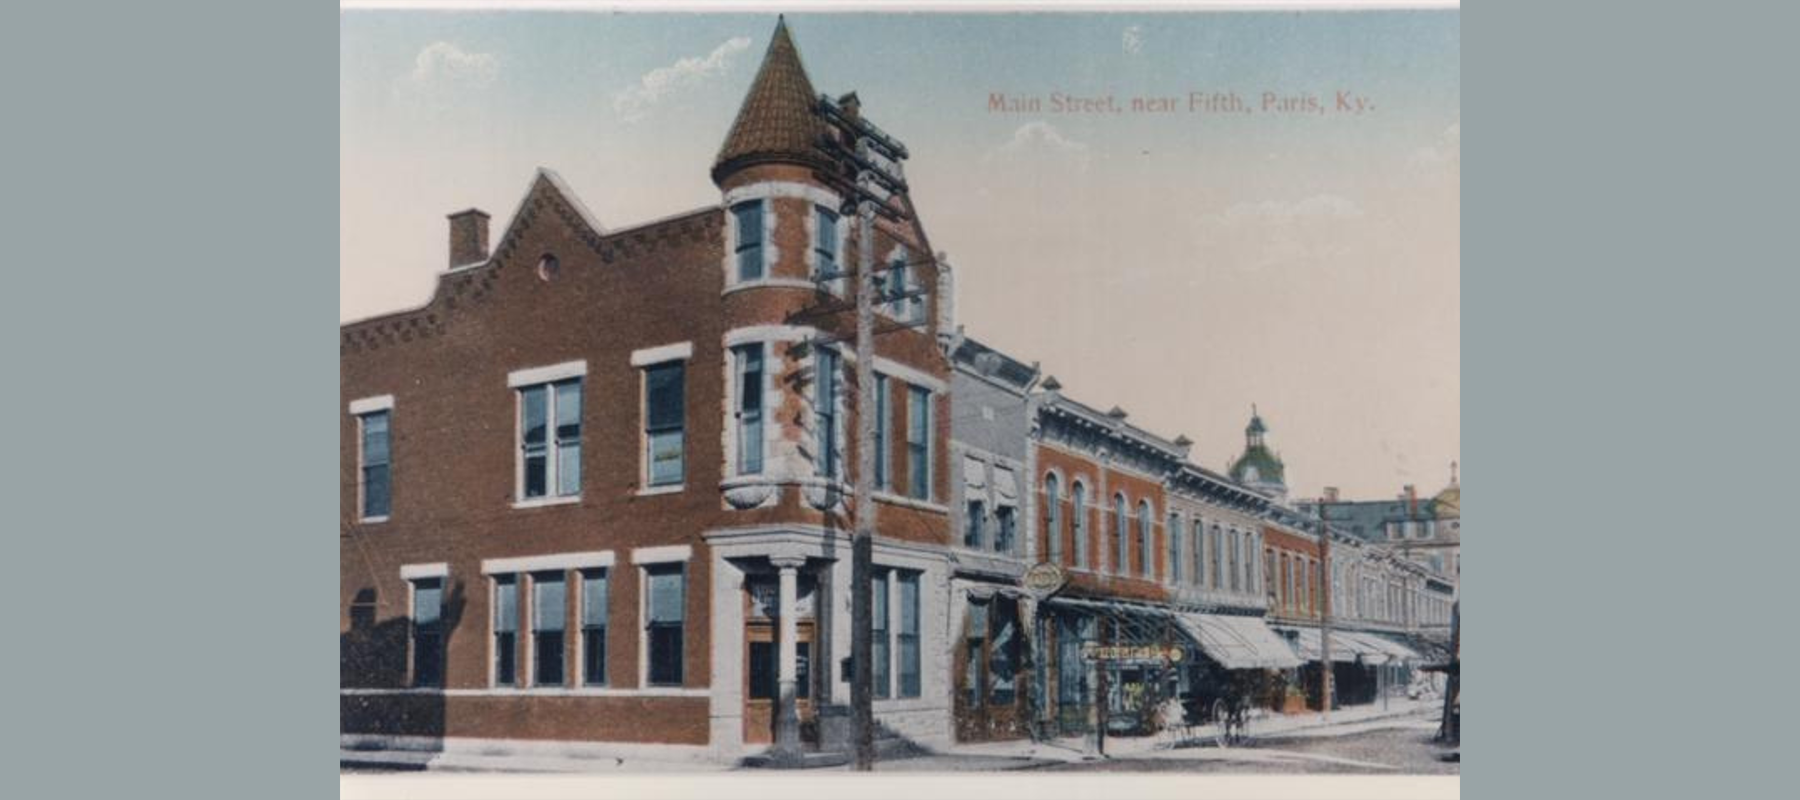 Old photo of downtown Paris Kentucky at Fifth and Main Streets